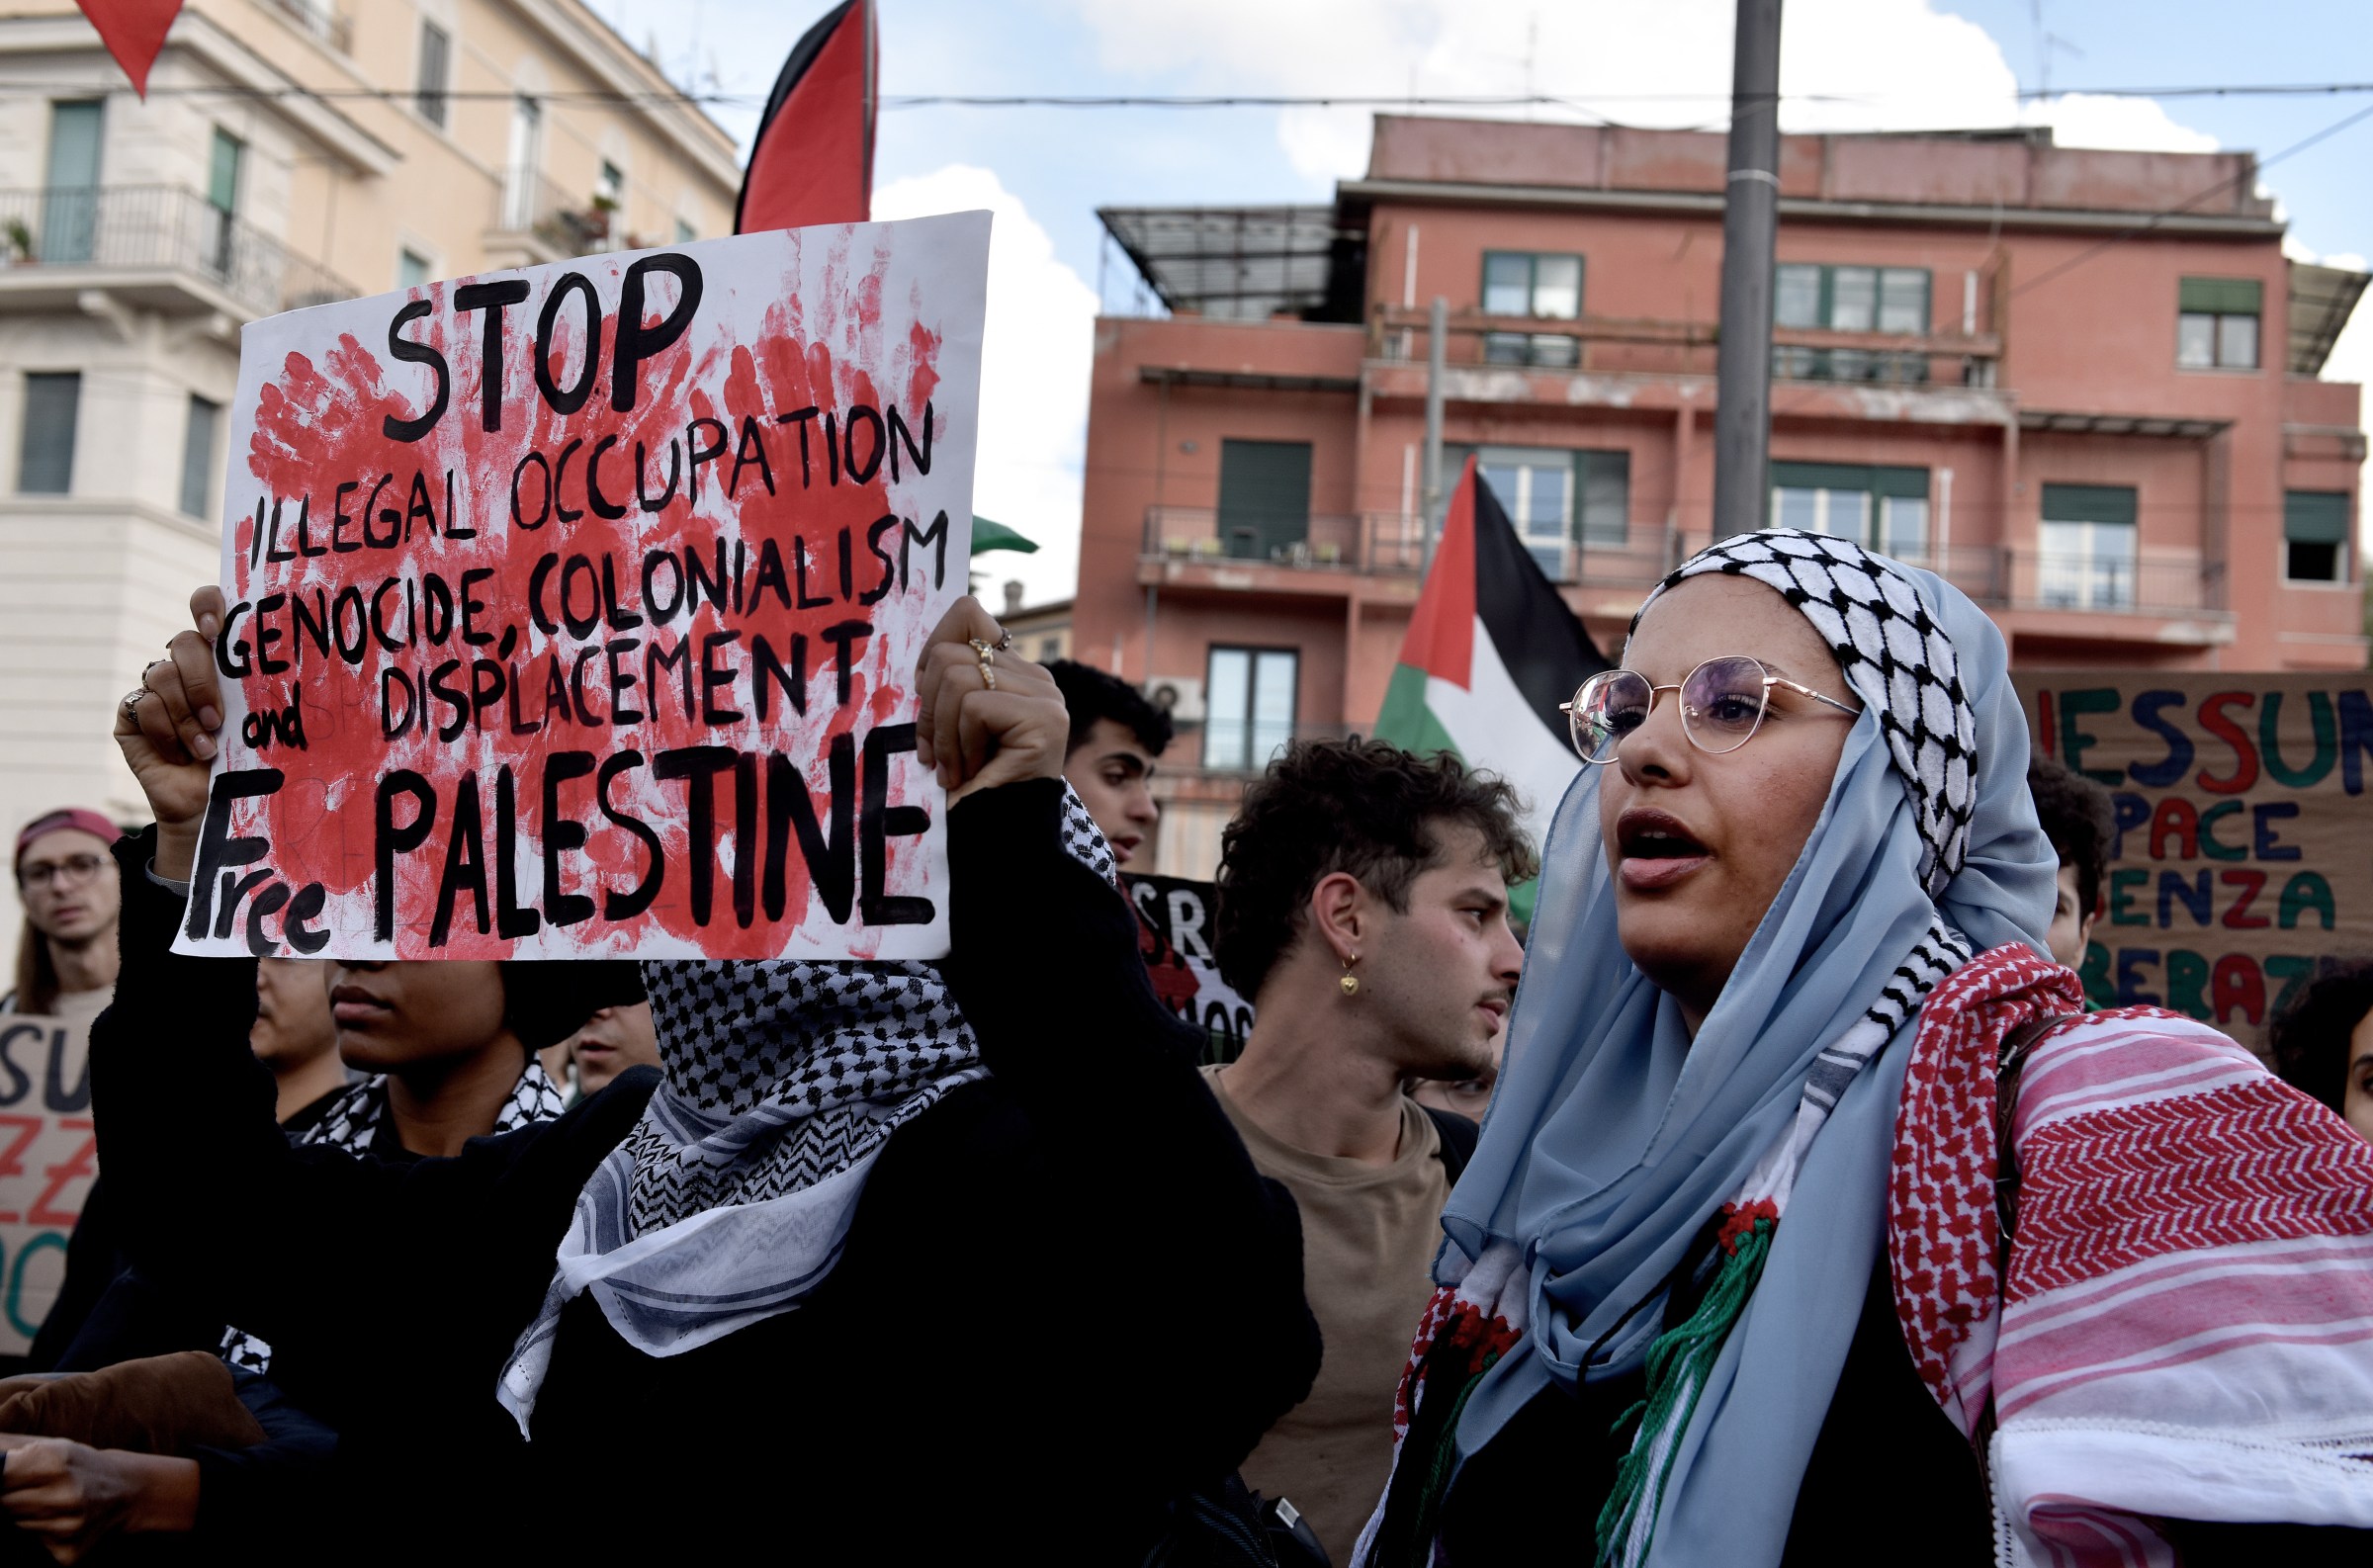 At a protest in Rome in October 2023 calling for a ceasefire and aid into Gaza, a protester holds a sign calling for an end to “colonialism and displacement” in Palestine.